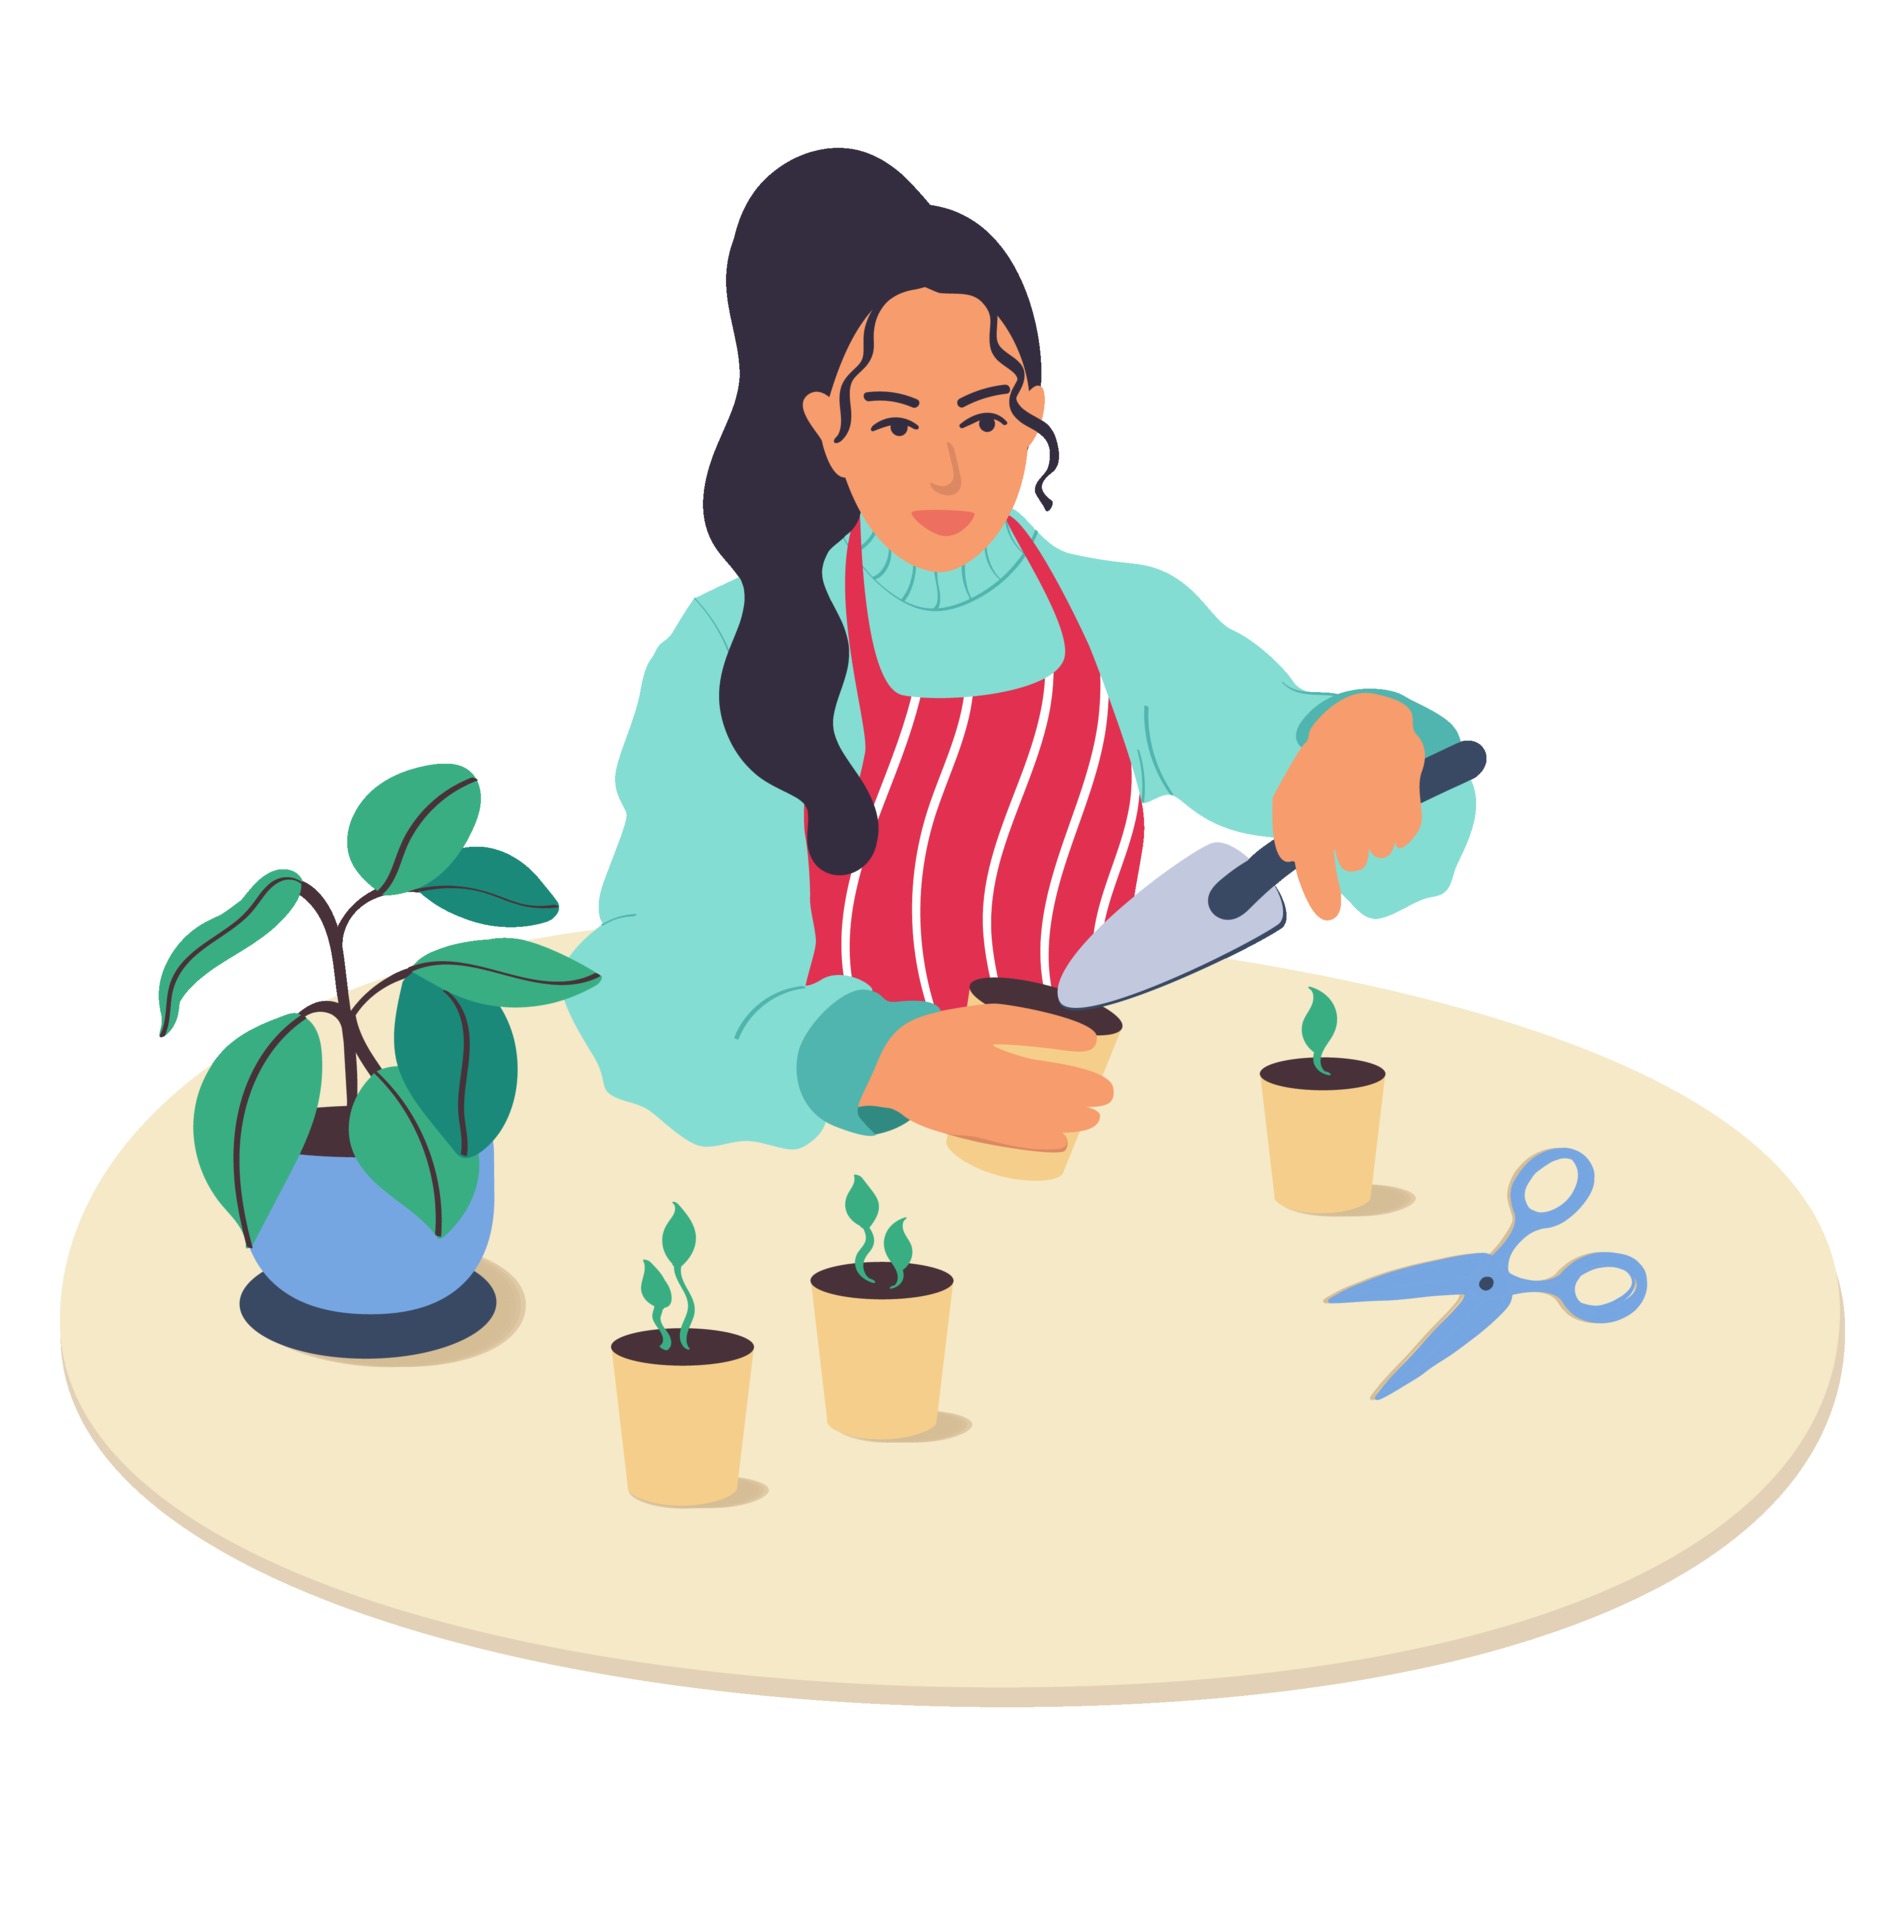 A young girl character plants plants at  woman holds in her hands  the shovel the garden,grow plants and enjoys  for indoor   illustration in a flat cartoon style 2435450 Vector